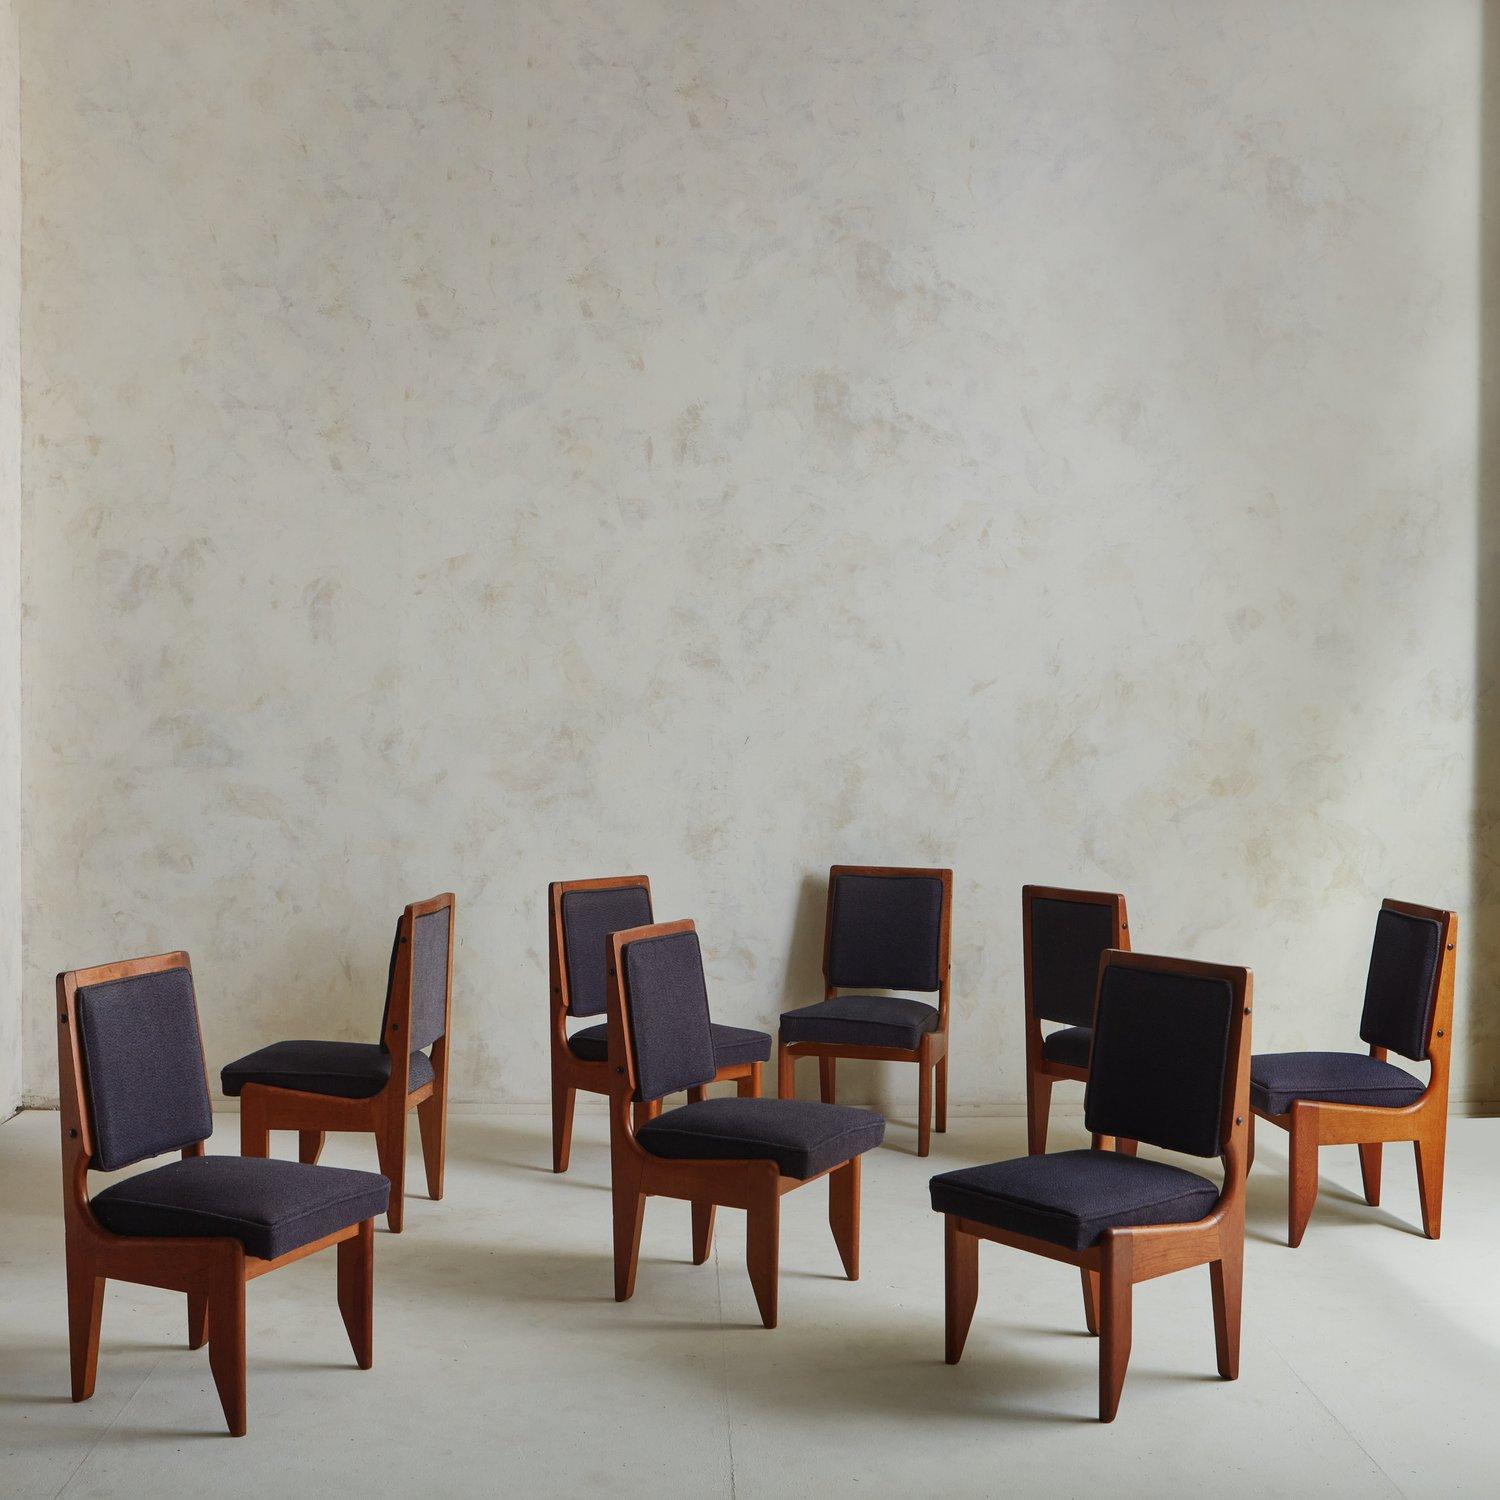 A set of 8 dining chairs by French design duo Guillerme et Chambron. These chairs have stained oak frames featuring beautiful craftsmanship and subtly tapered legs. They have upholstered seats and backs, which retain their original purple